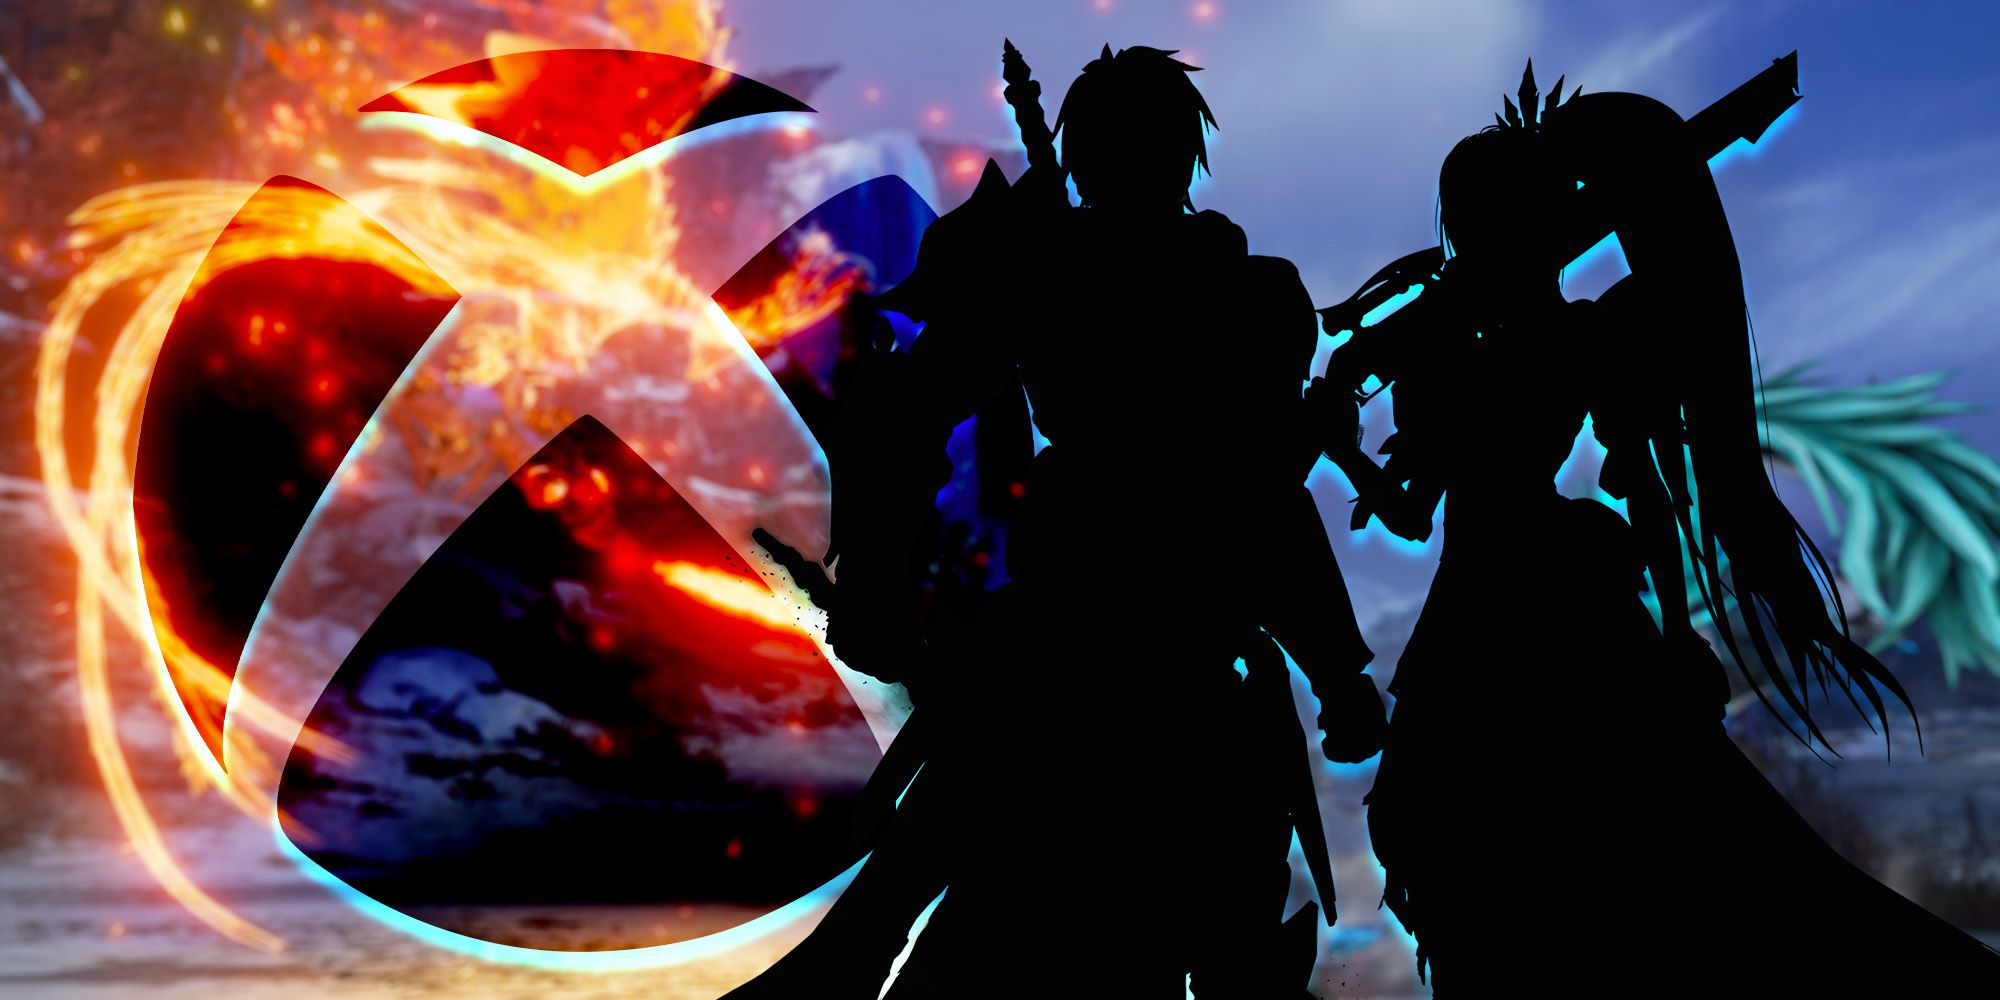 Characters from Tales of Arise in darkness with an Xbox logo.